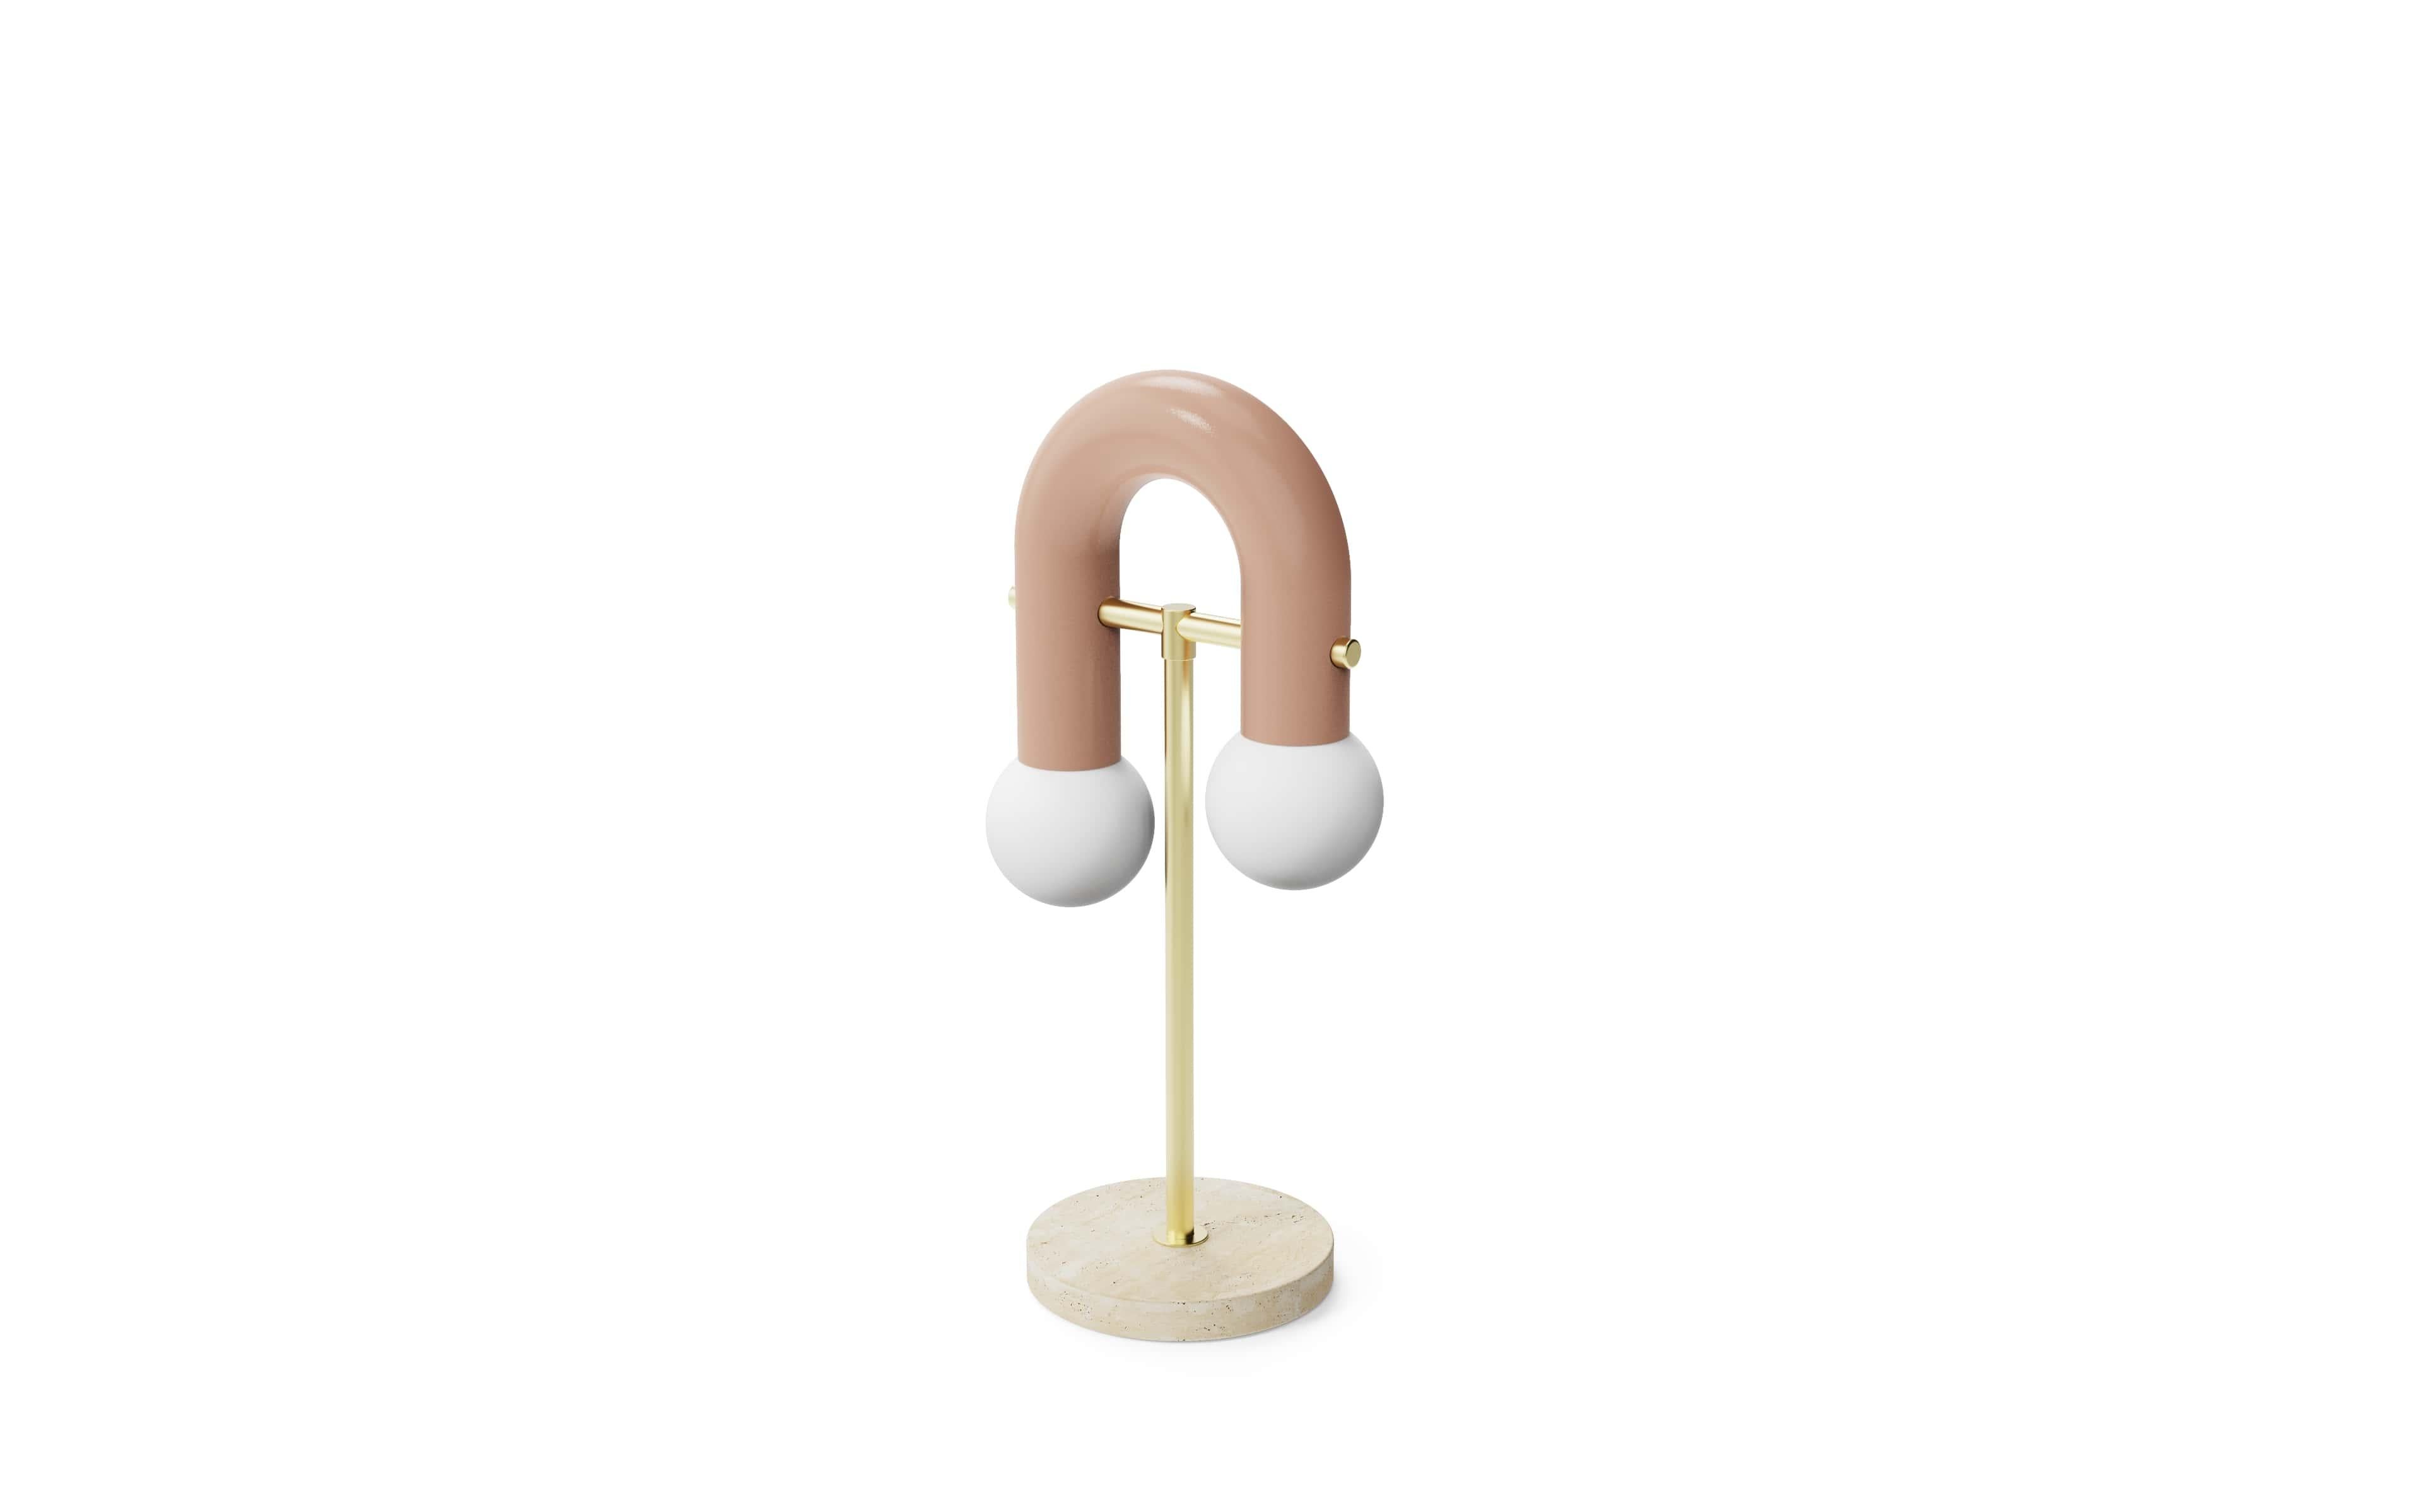 Pyppe table lamp by Utu Lamps
Dimensions: 35 x 12 x 25 cm
Materials: Lacquered metal, brass, nickel/copper, travertine

All our lamps can be wired according to each country. If sold to the USA it will be wired for the USA for instance.

Dooq is a